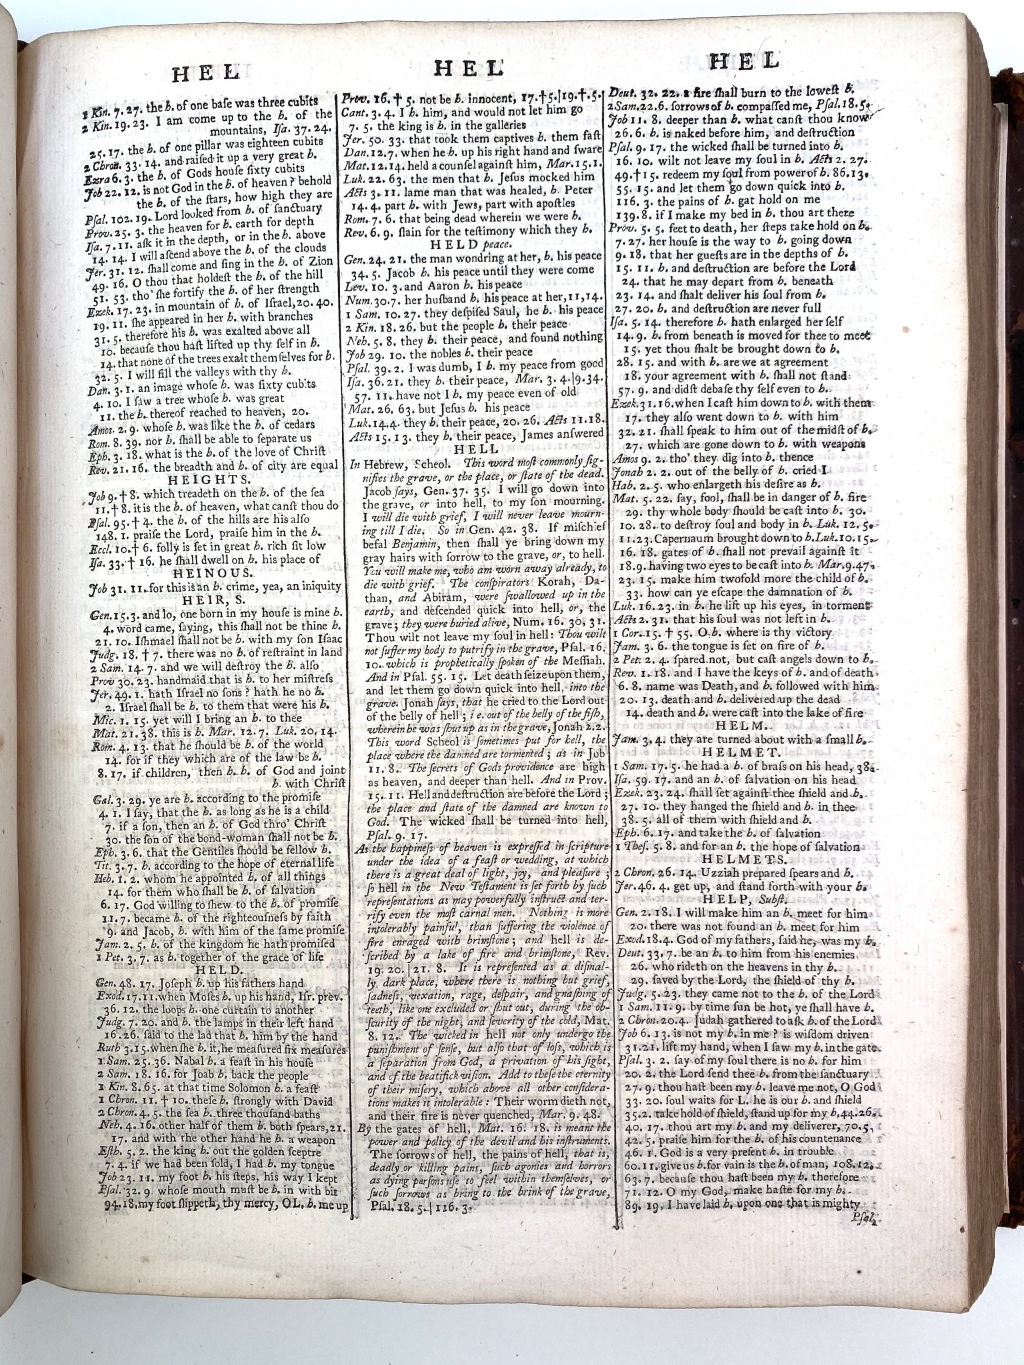 Cruden's references for Hell appear in the center of this typically dense three-column page of the concordance.